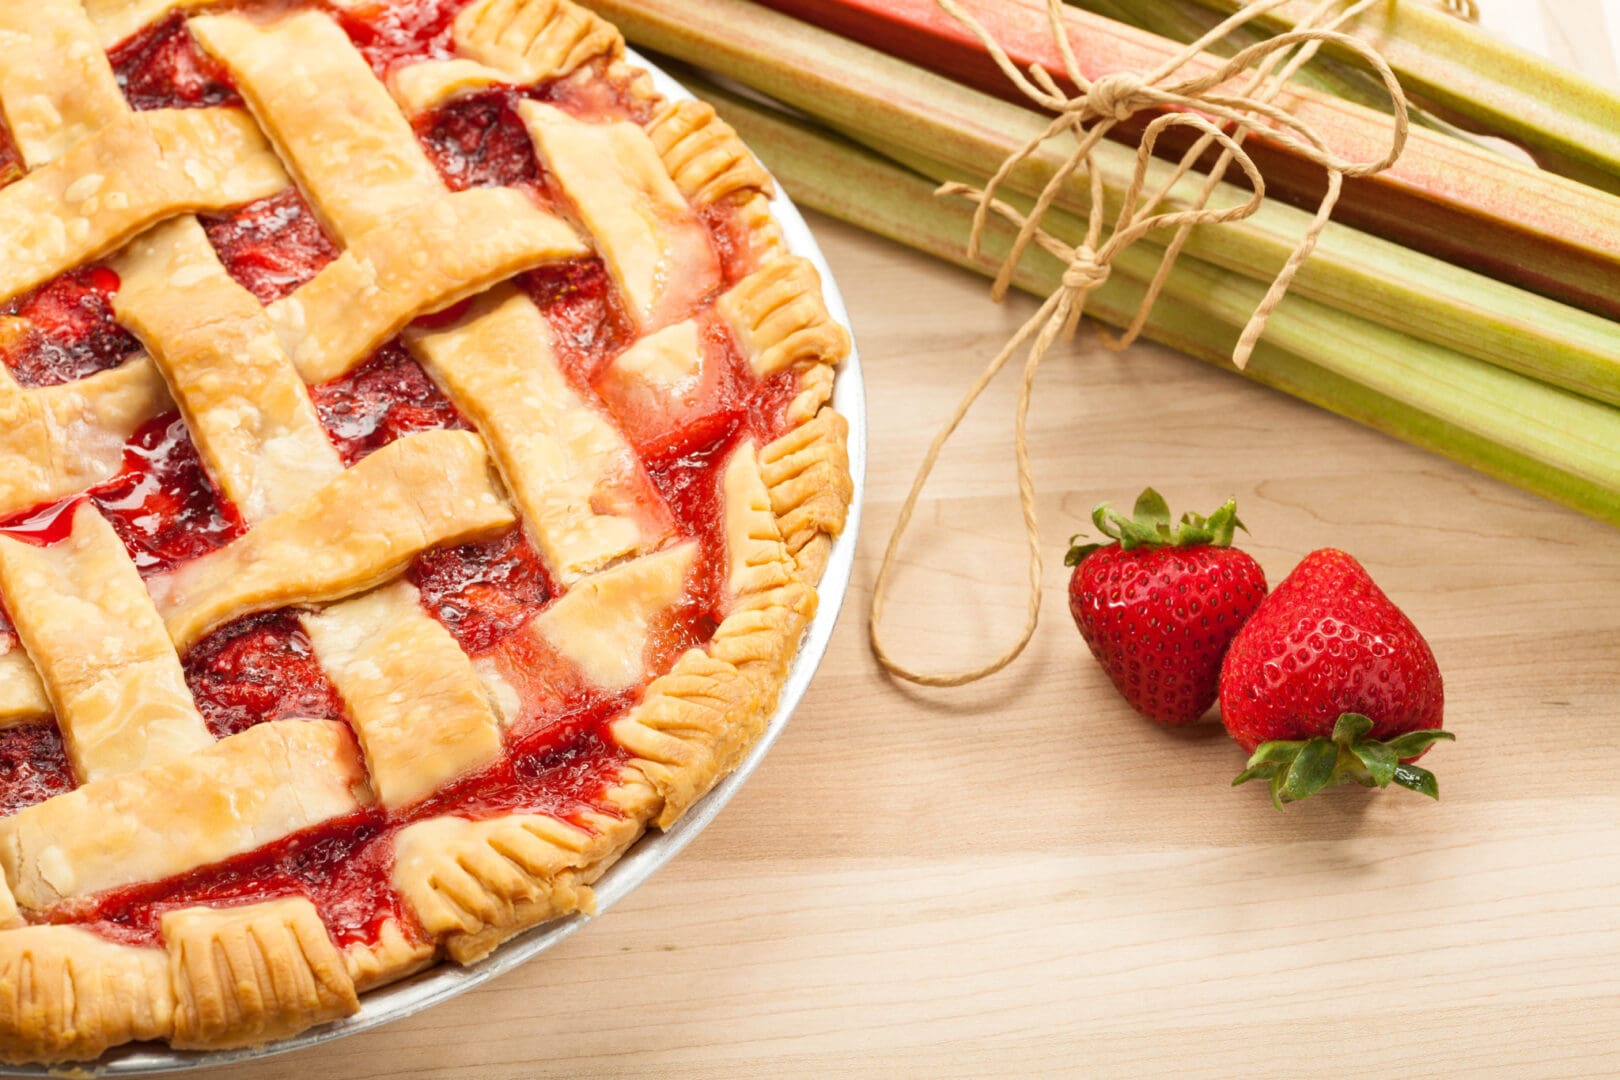 A pie with strawberries and rhubarb on a wooden table.